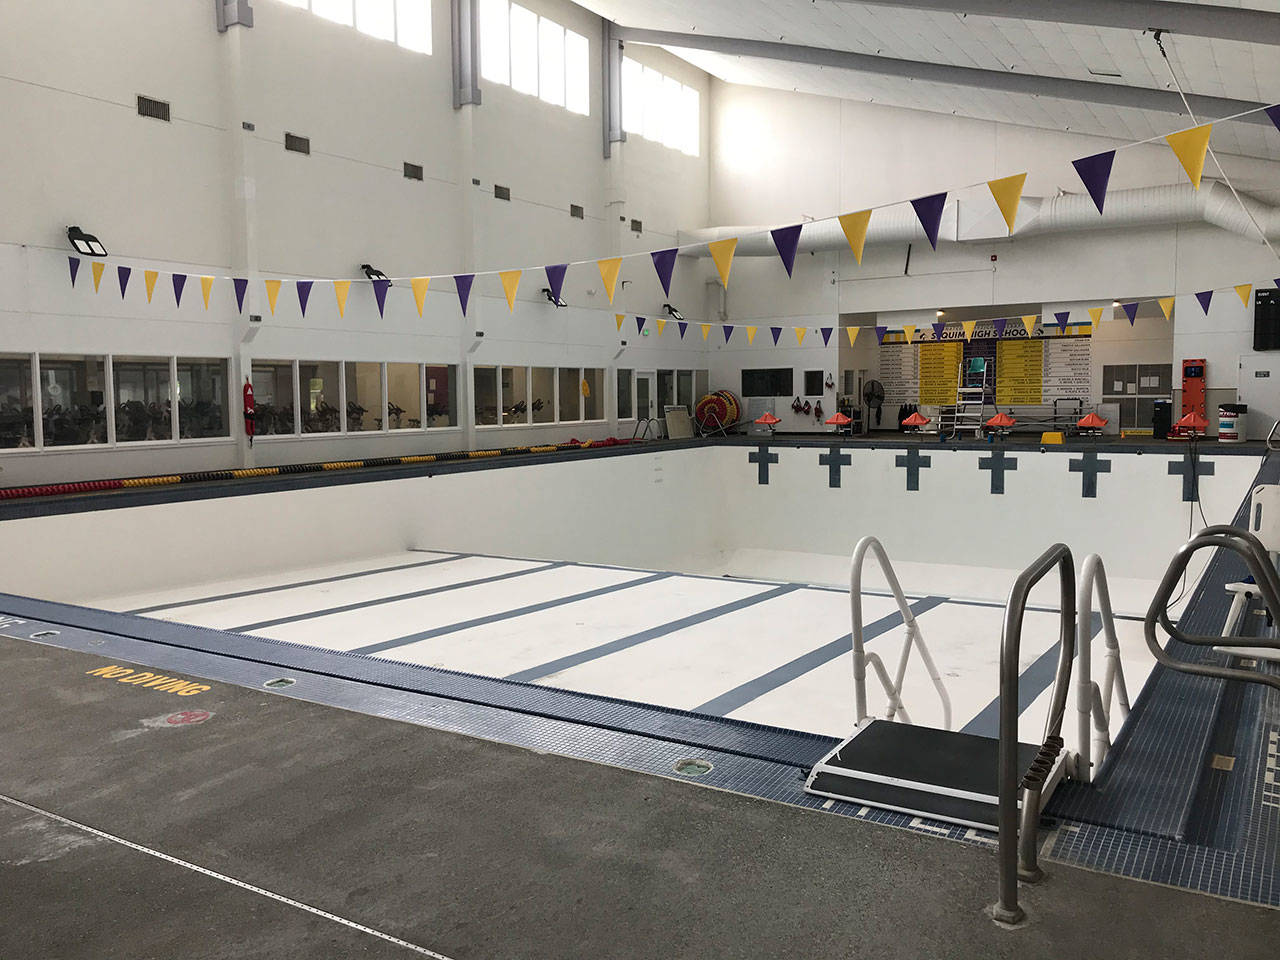 Staff with the Olympic Peninsula YMCA have used the most recent closure to drain, pressure wash and repainting pools at the Sequim facility at 610 N. Fifth Ave. Photo courtesy of Olympic Peninsula YMCA